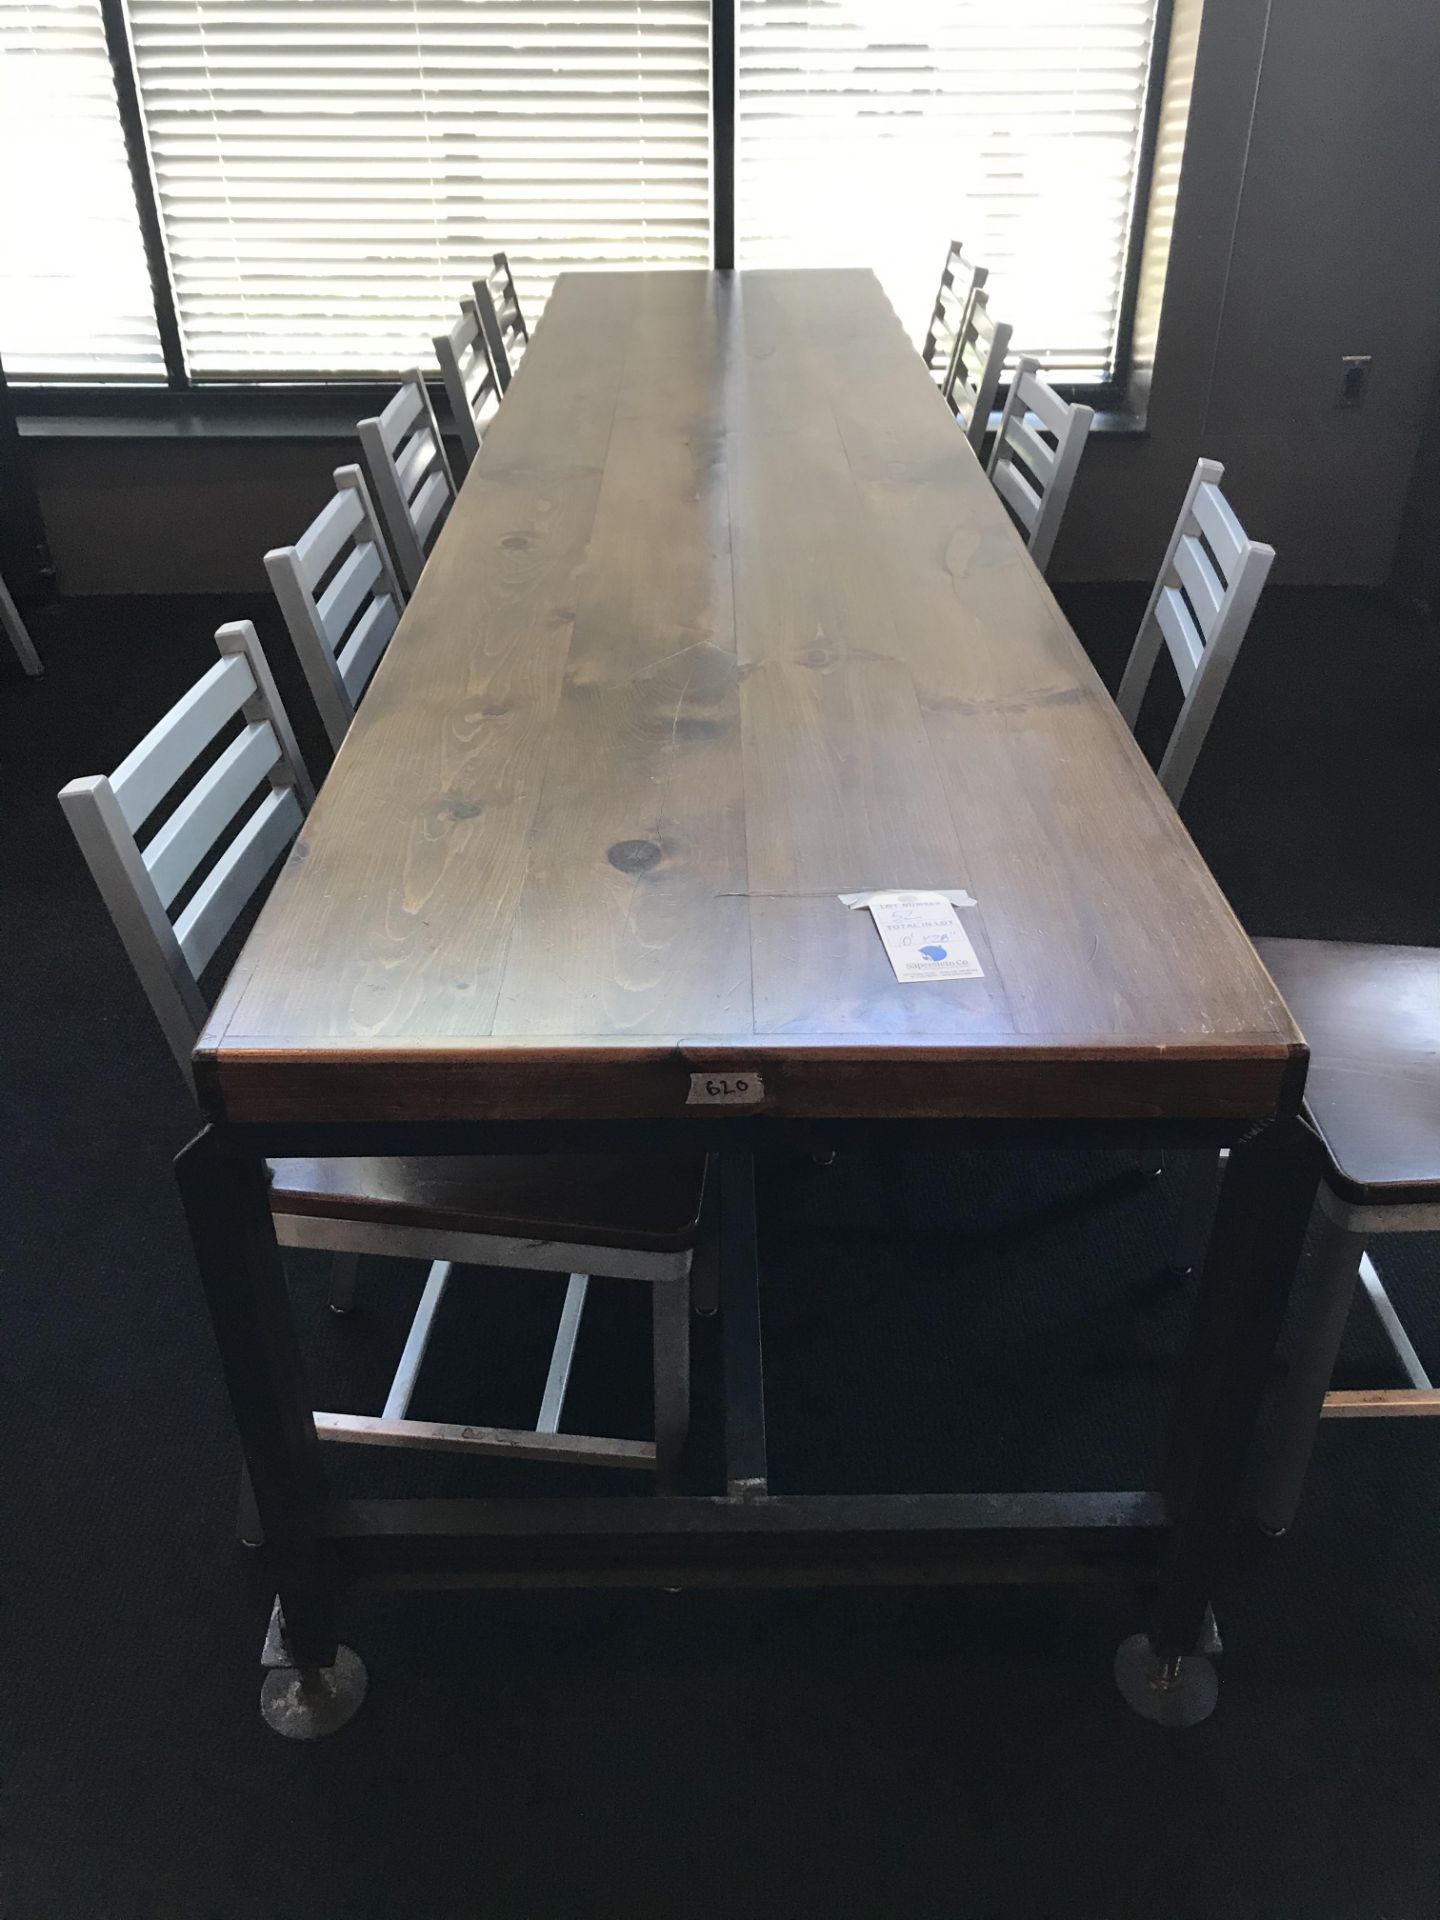 10' x 28" x 2 3/8" Thick Solid Wood Communal Table w/Steel Frame & Adjustable Height Feet